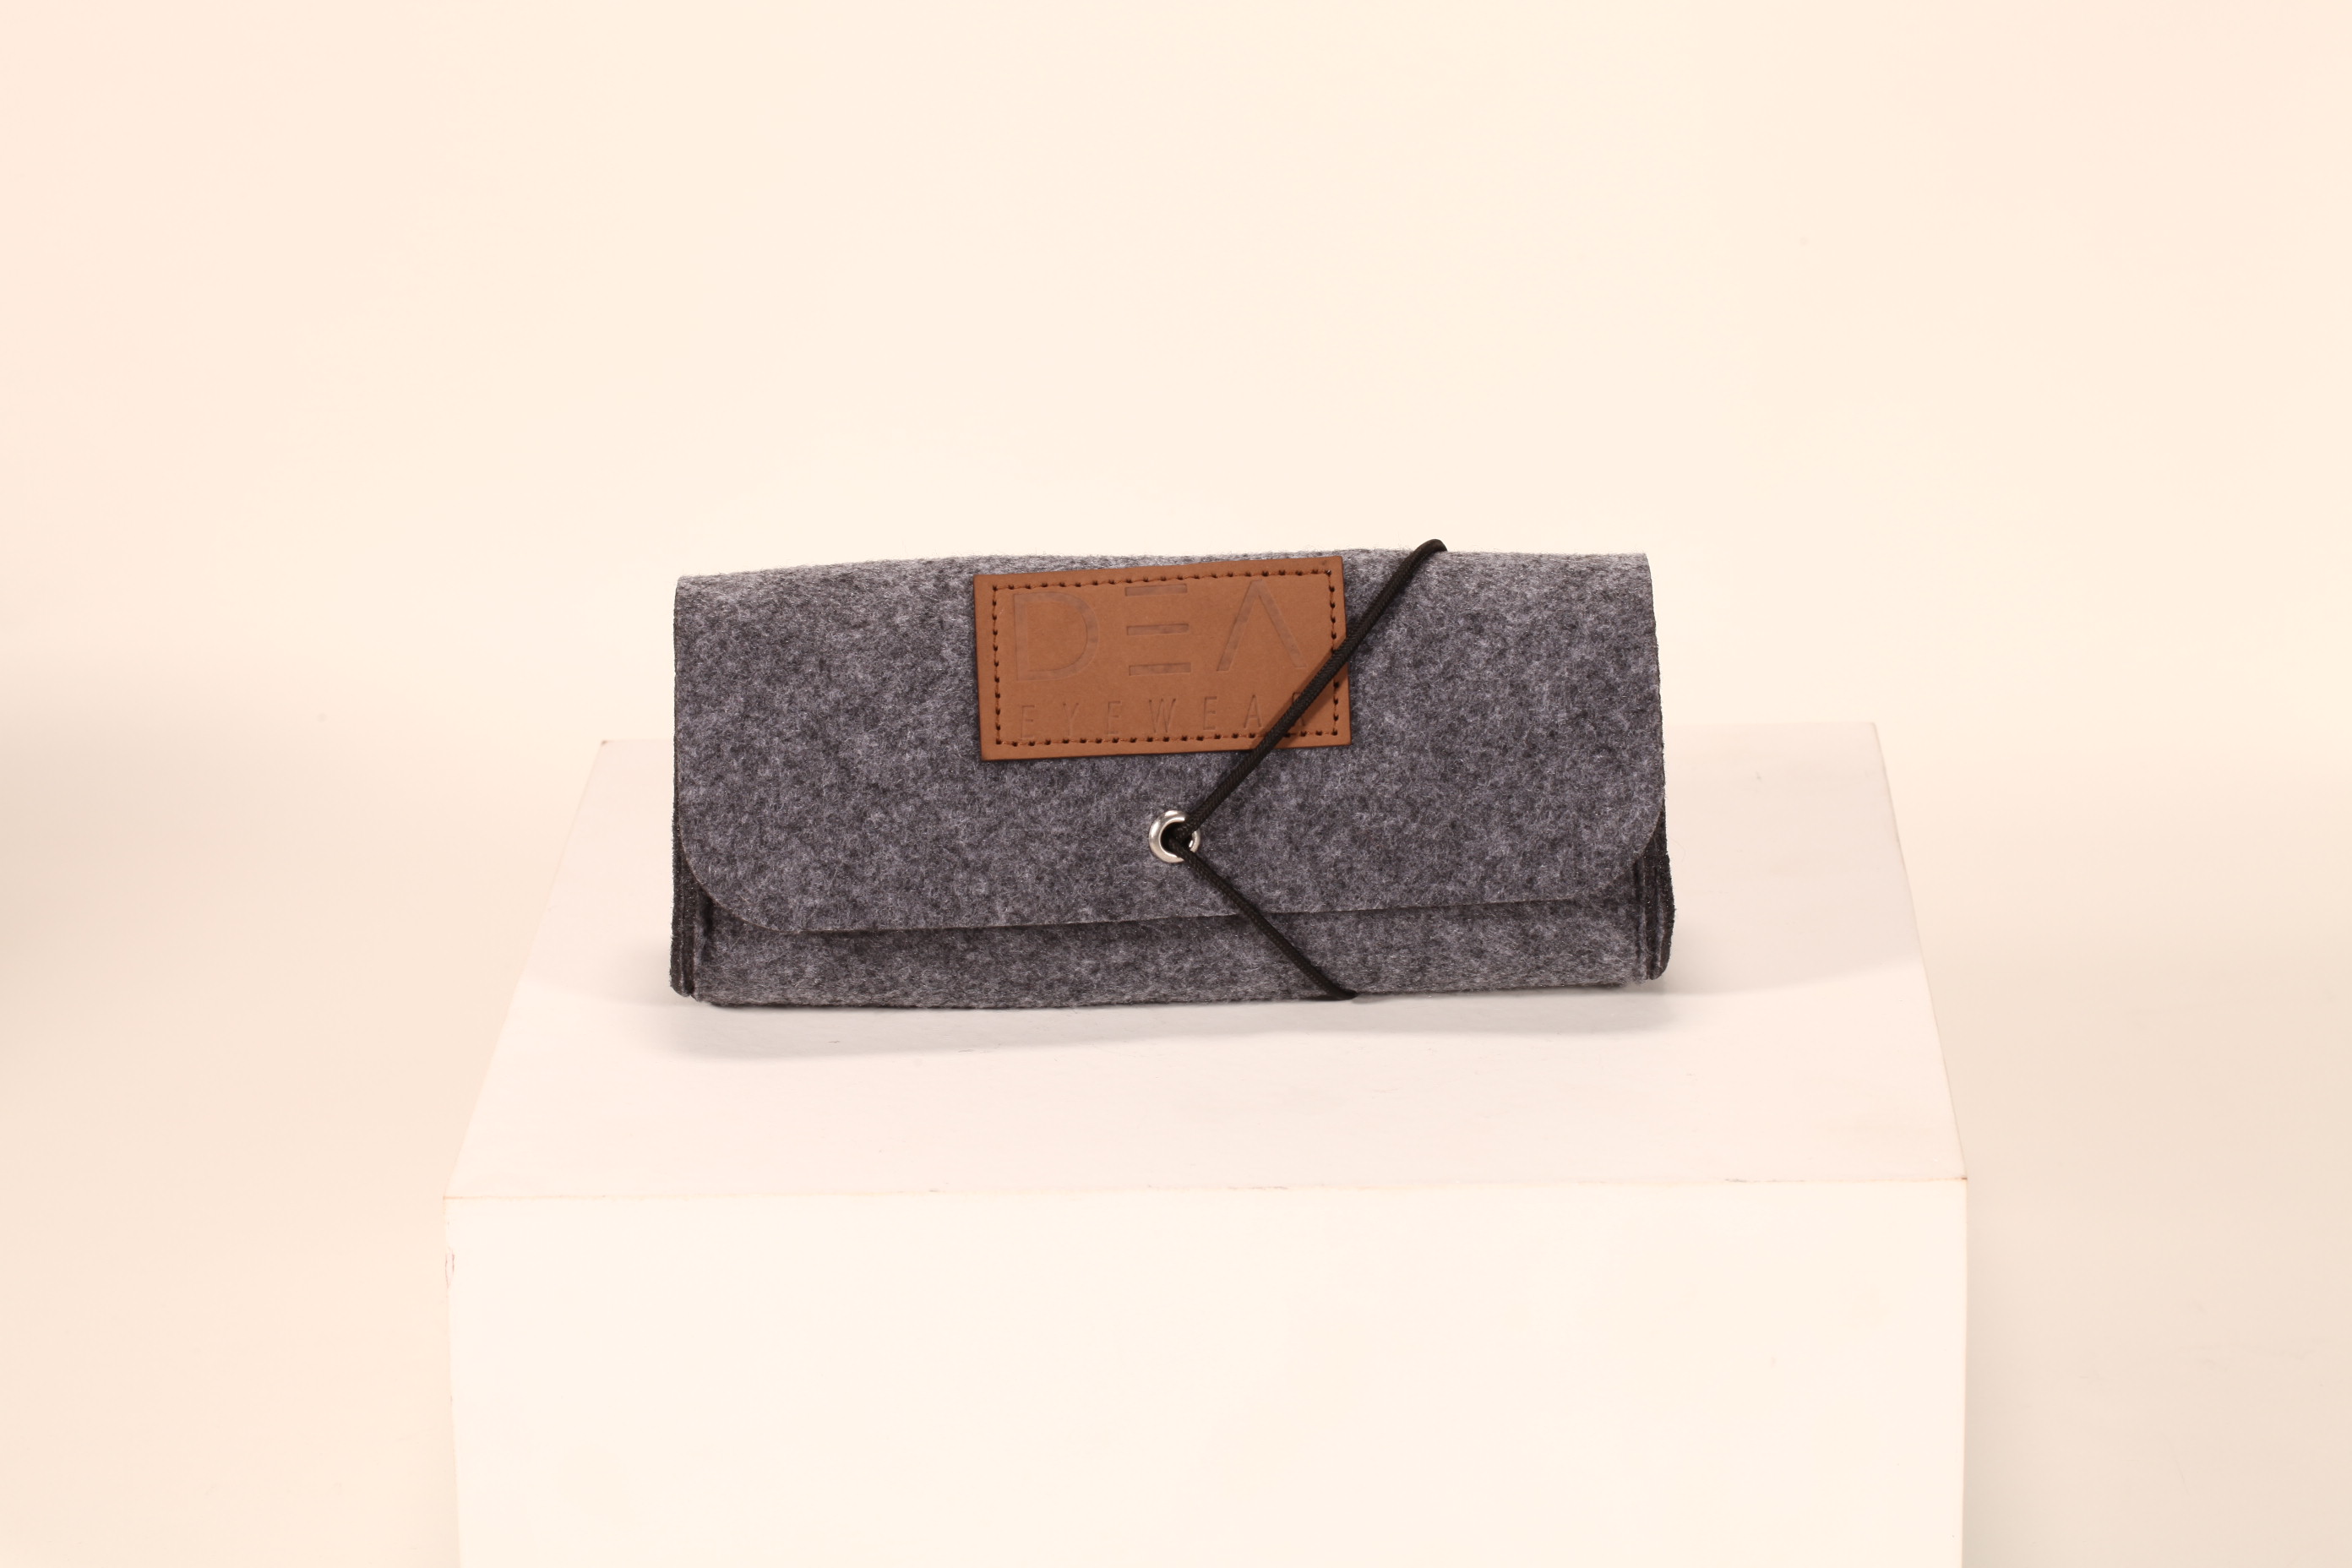 A felt glasses case soft bag, with an elastic rope to hold, the design is very clever